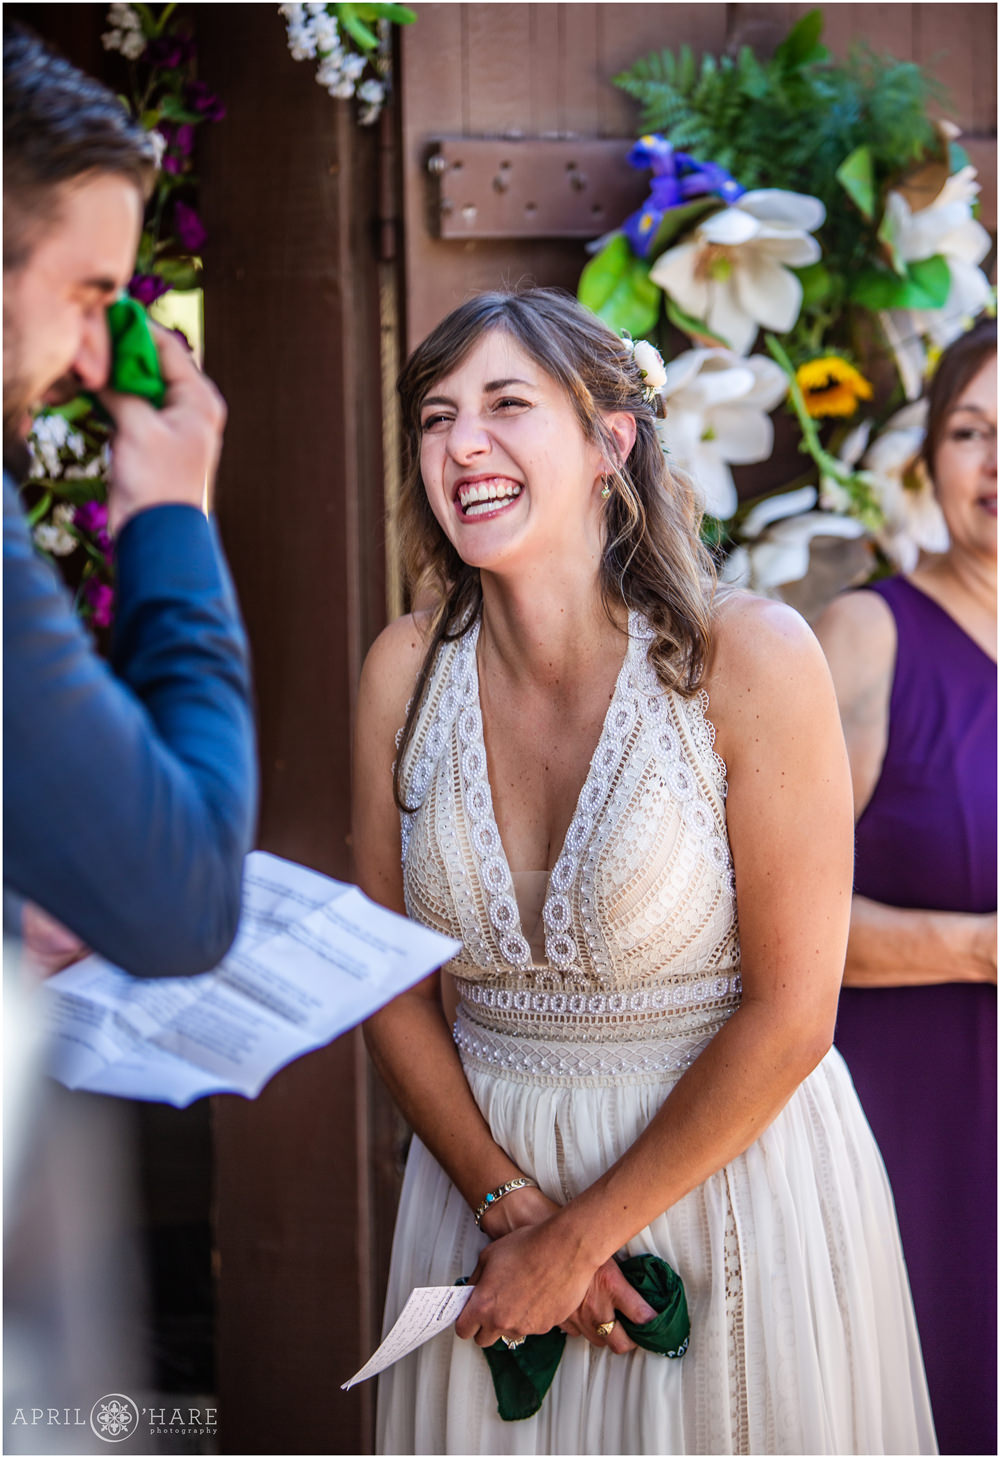 Bride laughs with her groom at their emotional outdoor wedding in Colorado at a private rental home